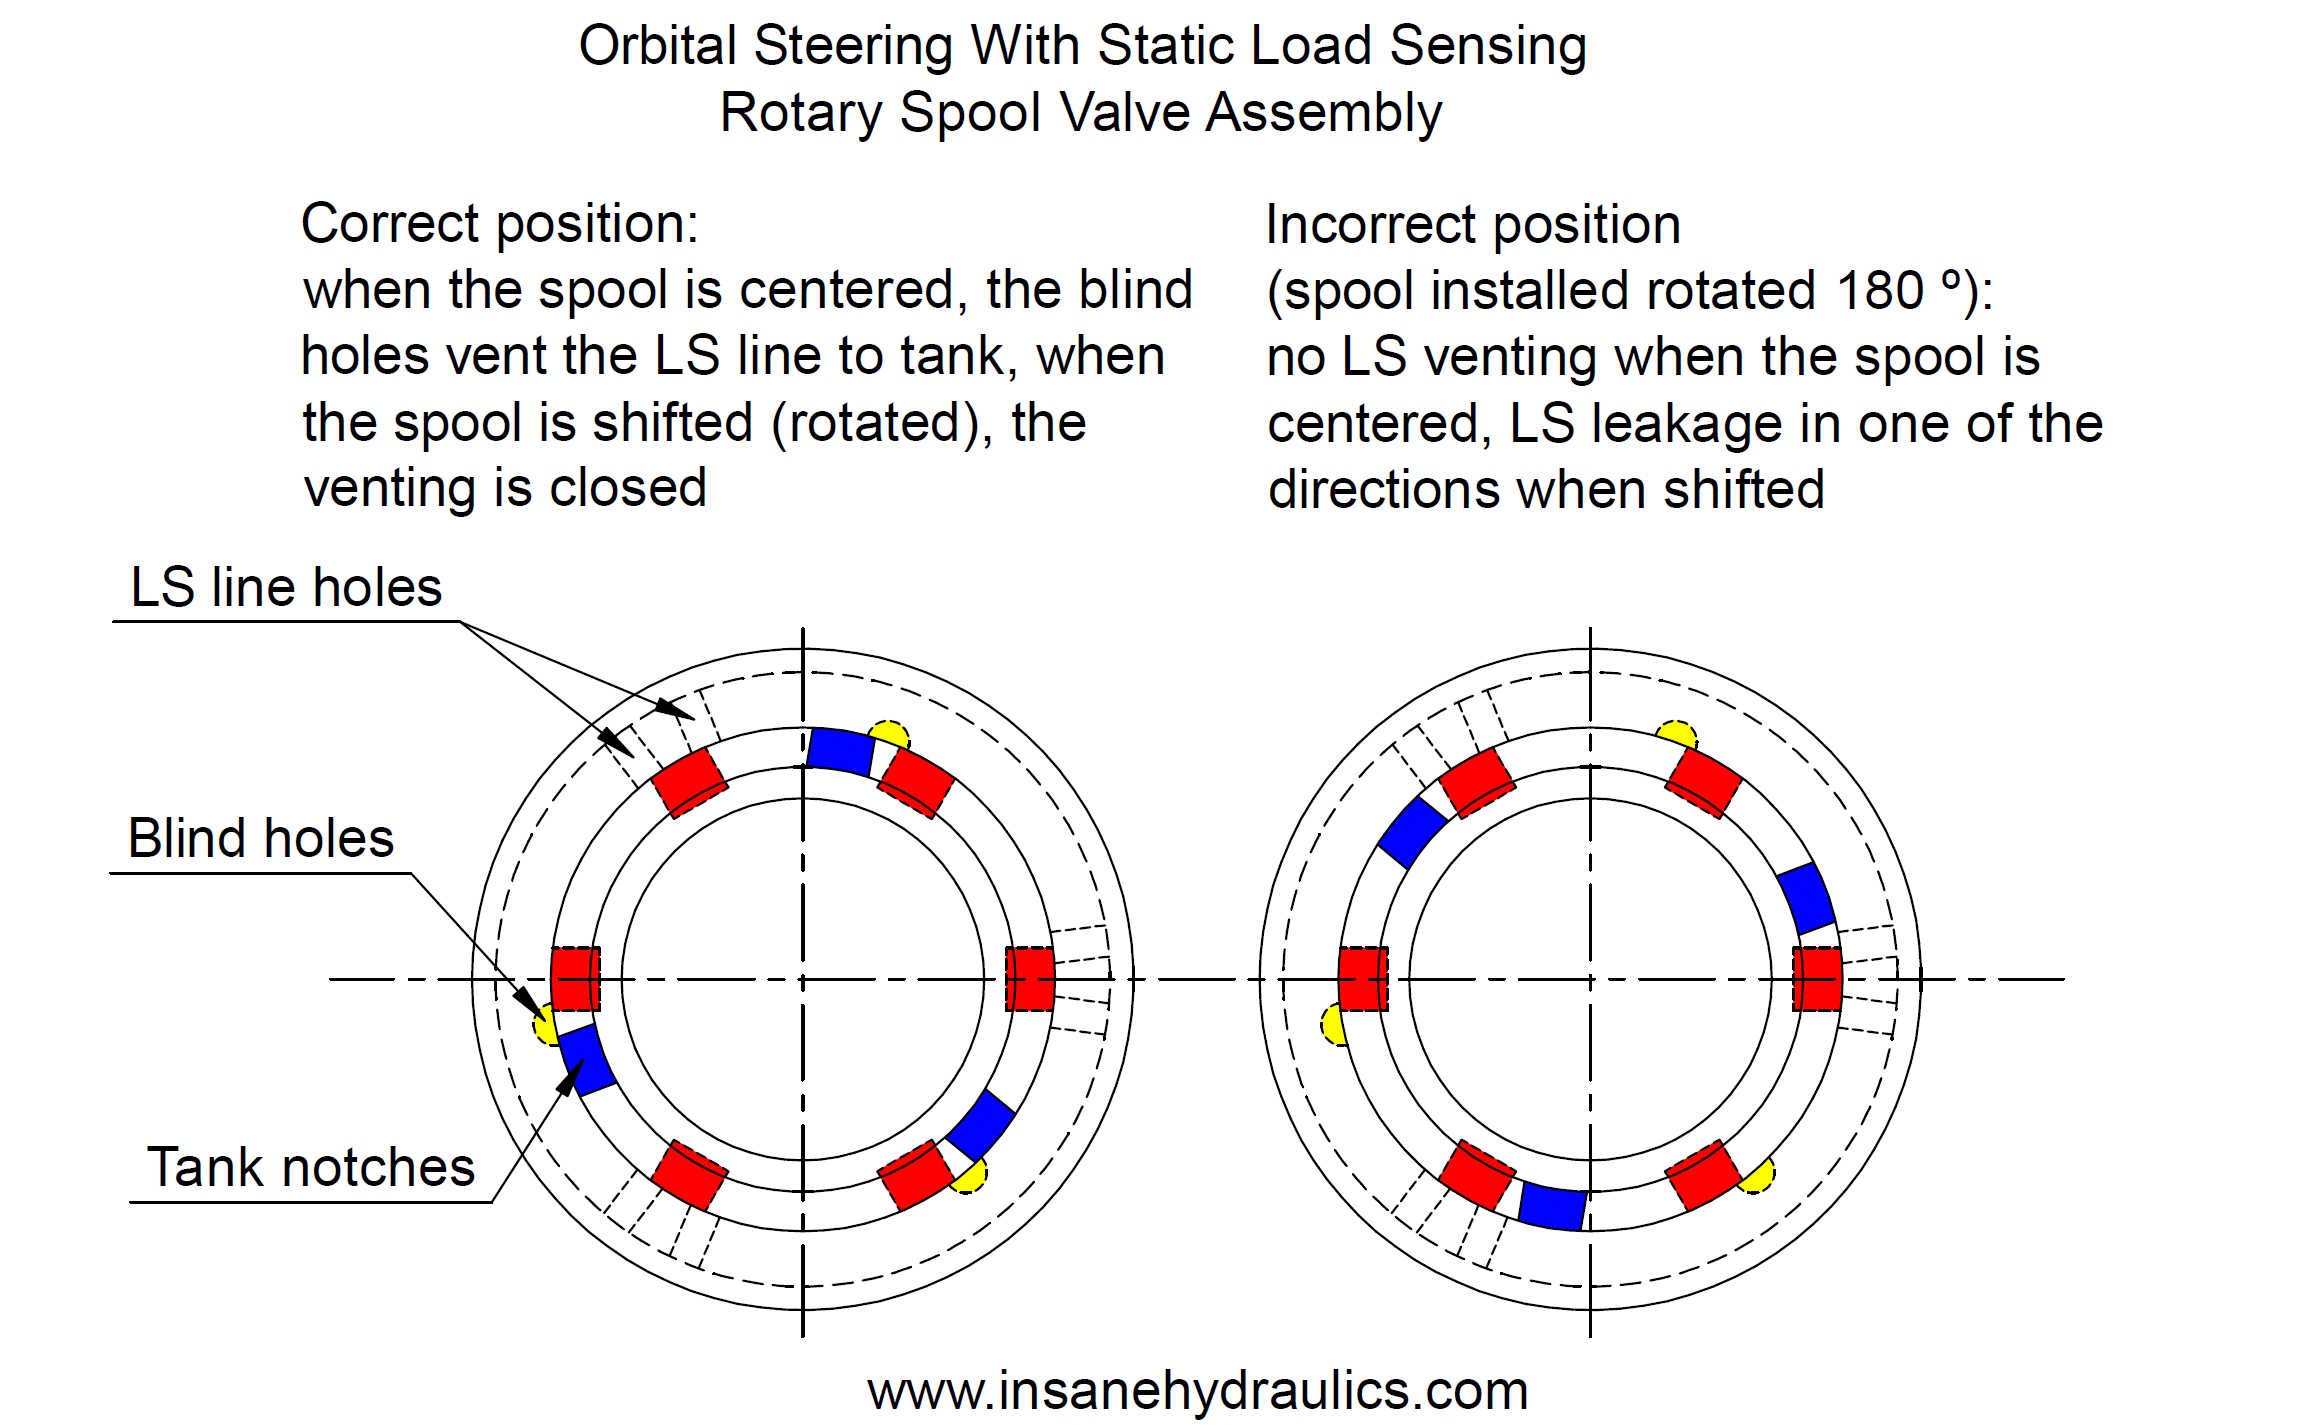 Orbital Steering With Static Load Sensing - Rotary Spool Valve Assembly